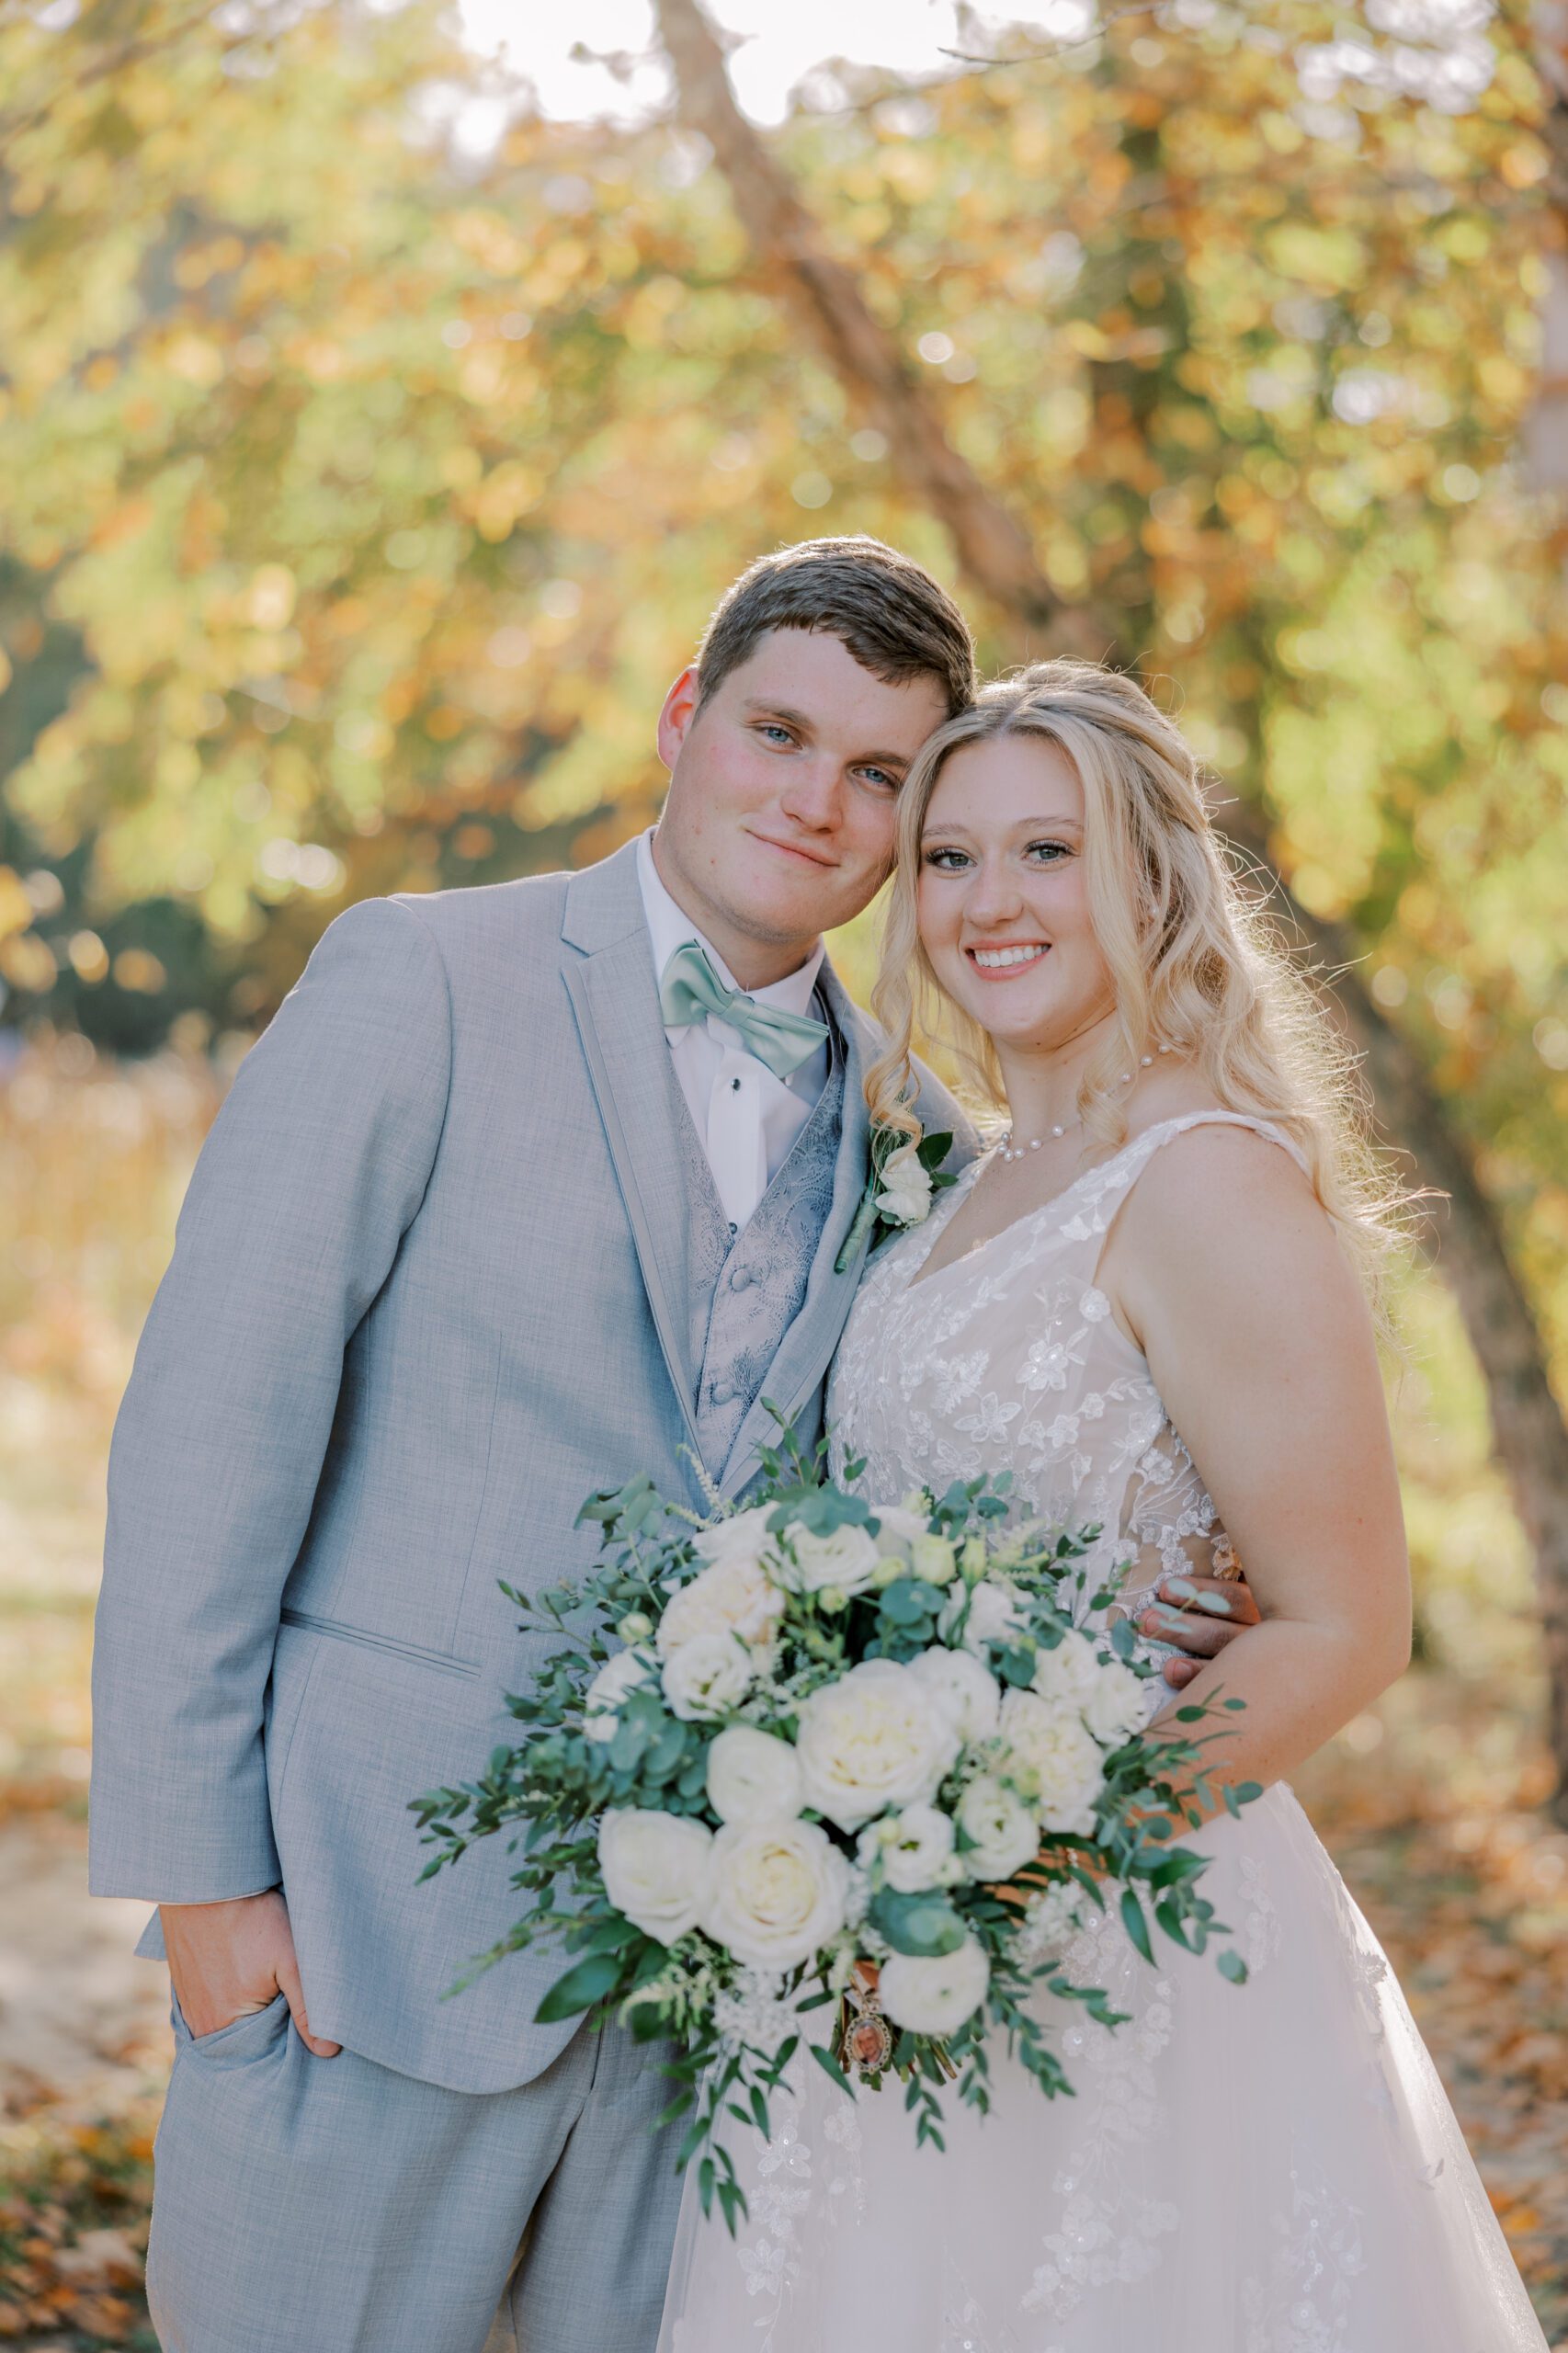 Image of bride and groom, autumn colored trees in background, both smiling at camera at their arbor haven fall wedding